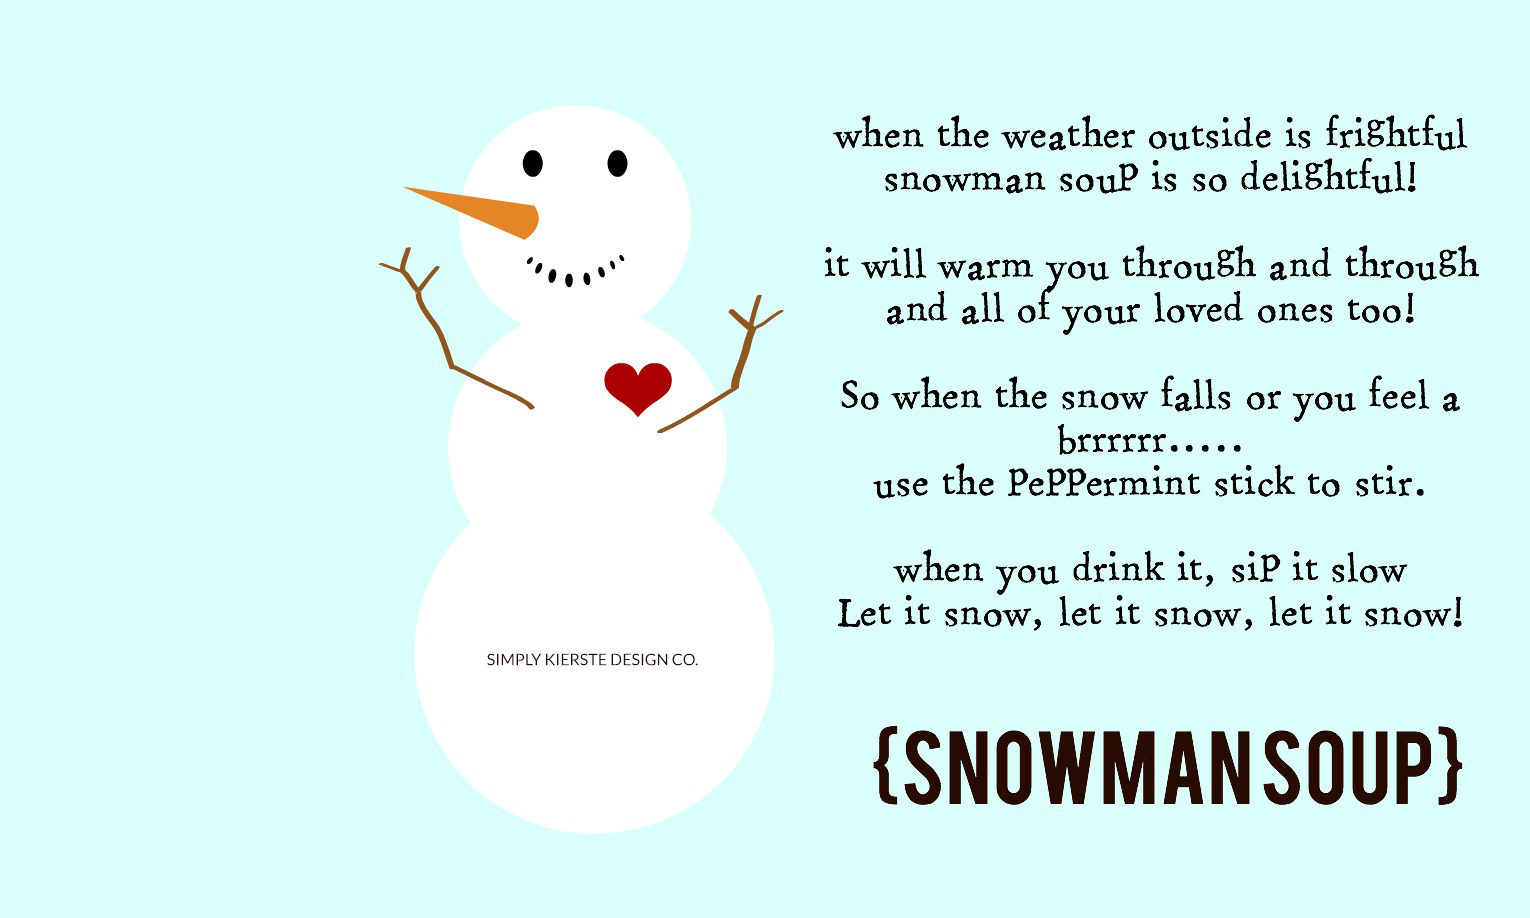 Snowman Soup | Christmas Gift Idea | Neighbor Gift Idea | oldsaltfarm.com #neighborgifts #christmasgifts #easychristmasgifts